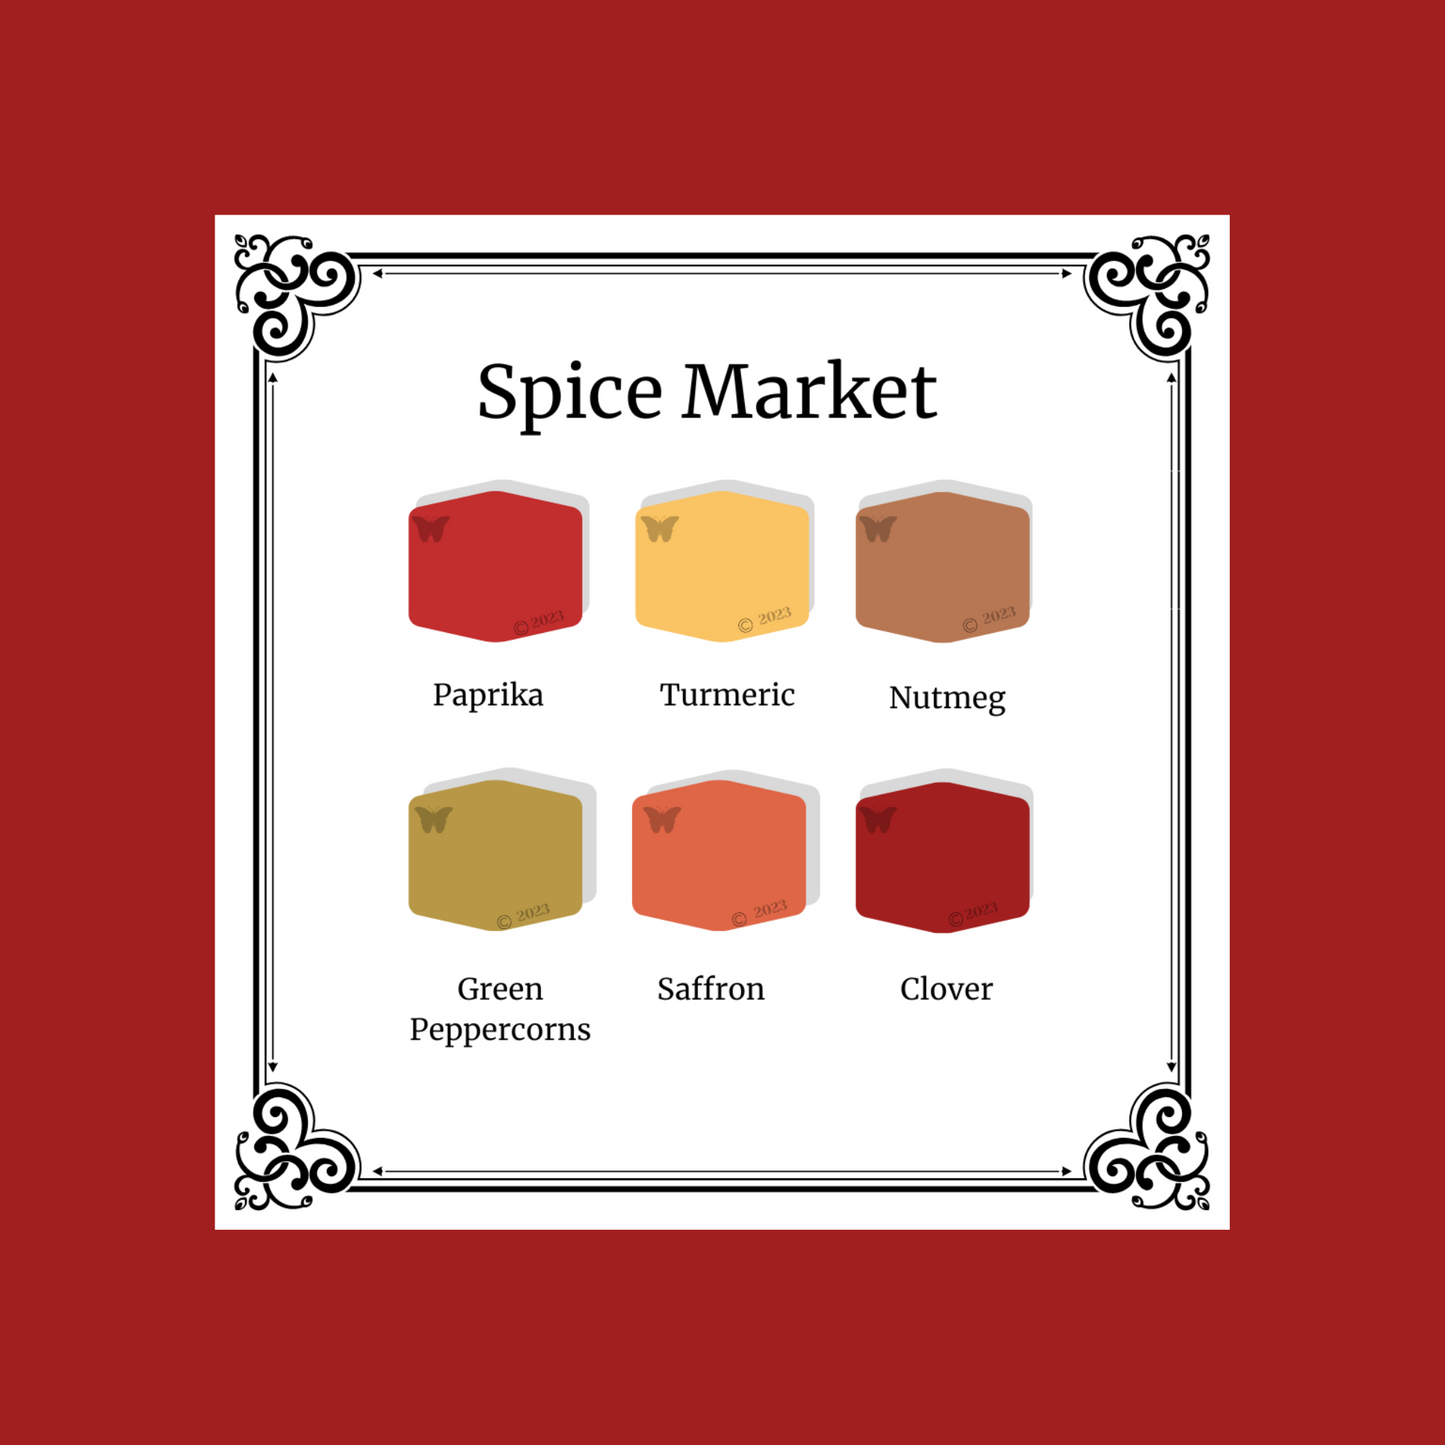 Showing the 6 color palette of Spice Market: Turmeric, Paprika, Green Peppercorns, Clove Saffron and Nutmeg on a paprika background